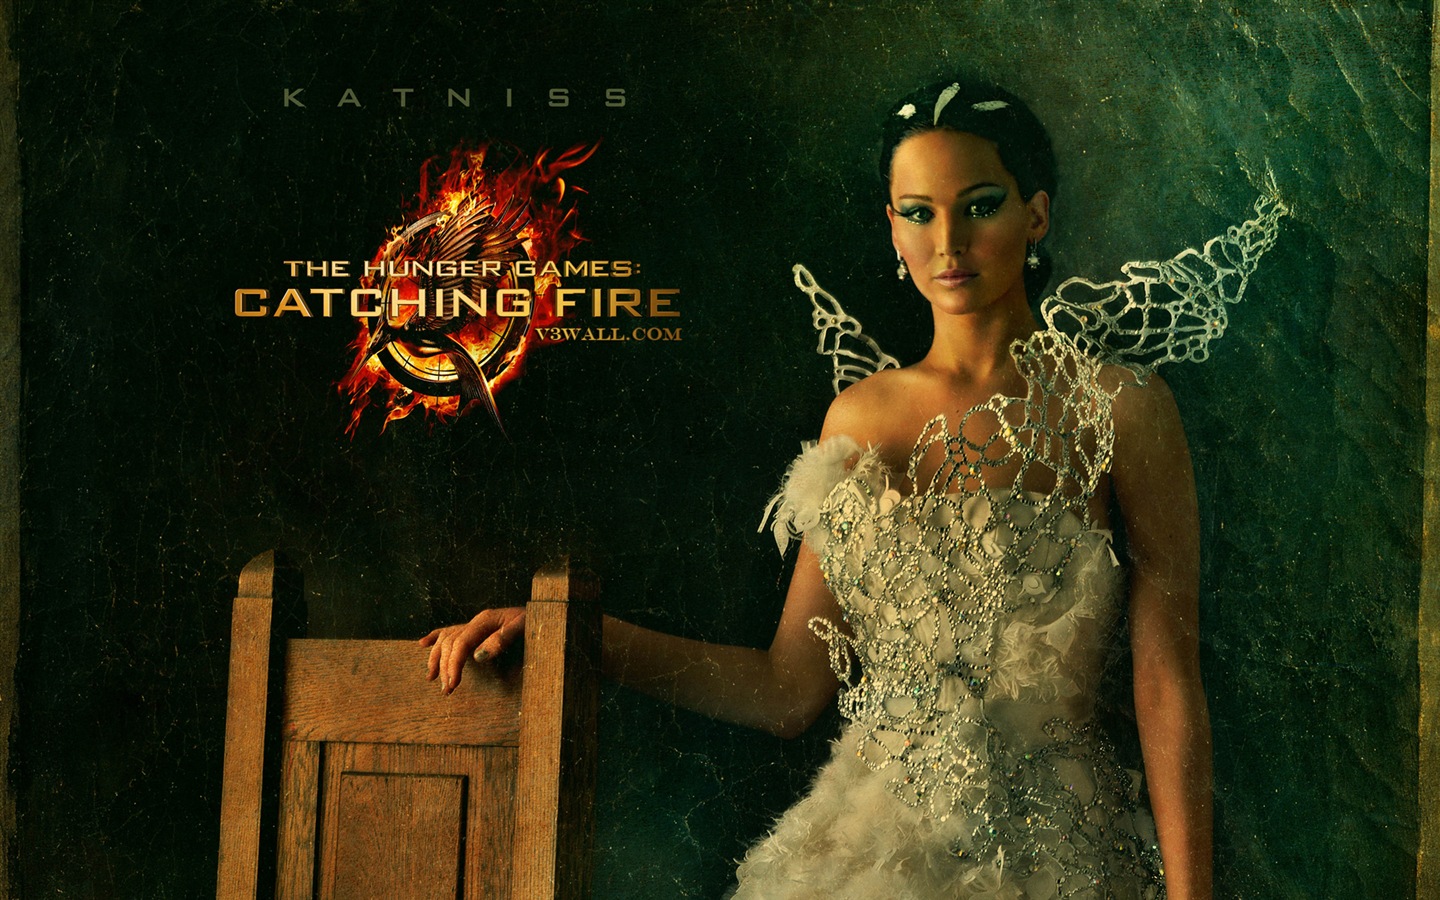 The Hunger Games: Catching Fire wallpapers HD #13 - 1440x900